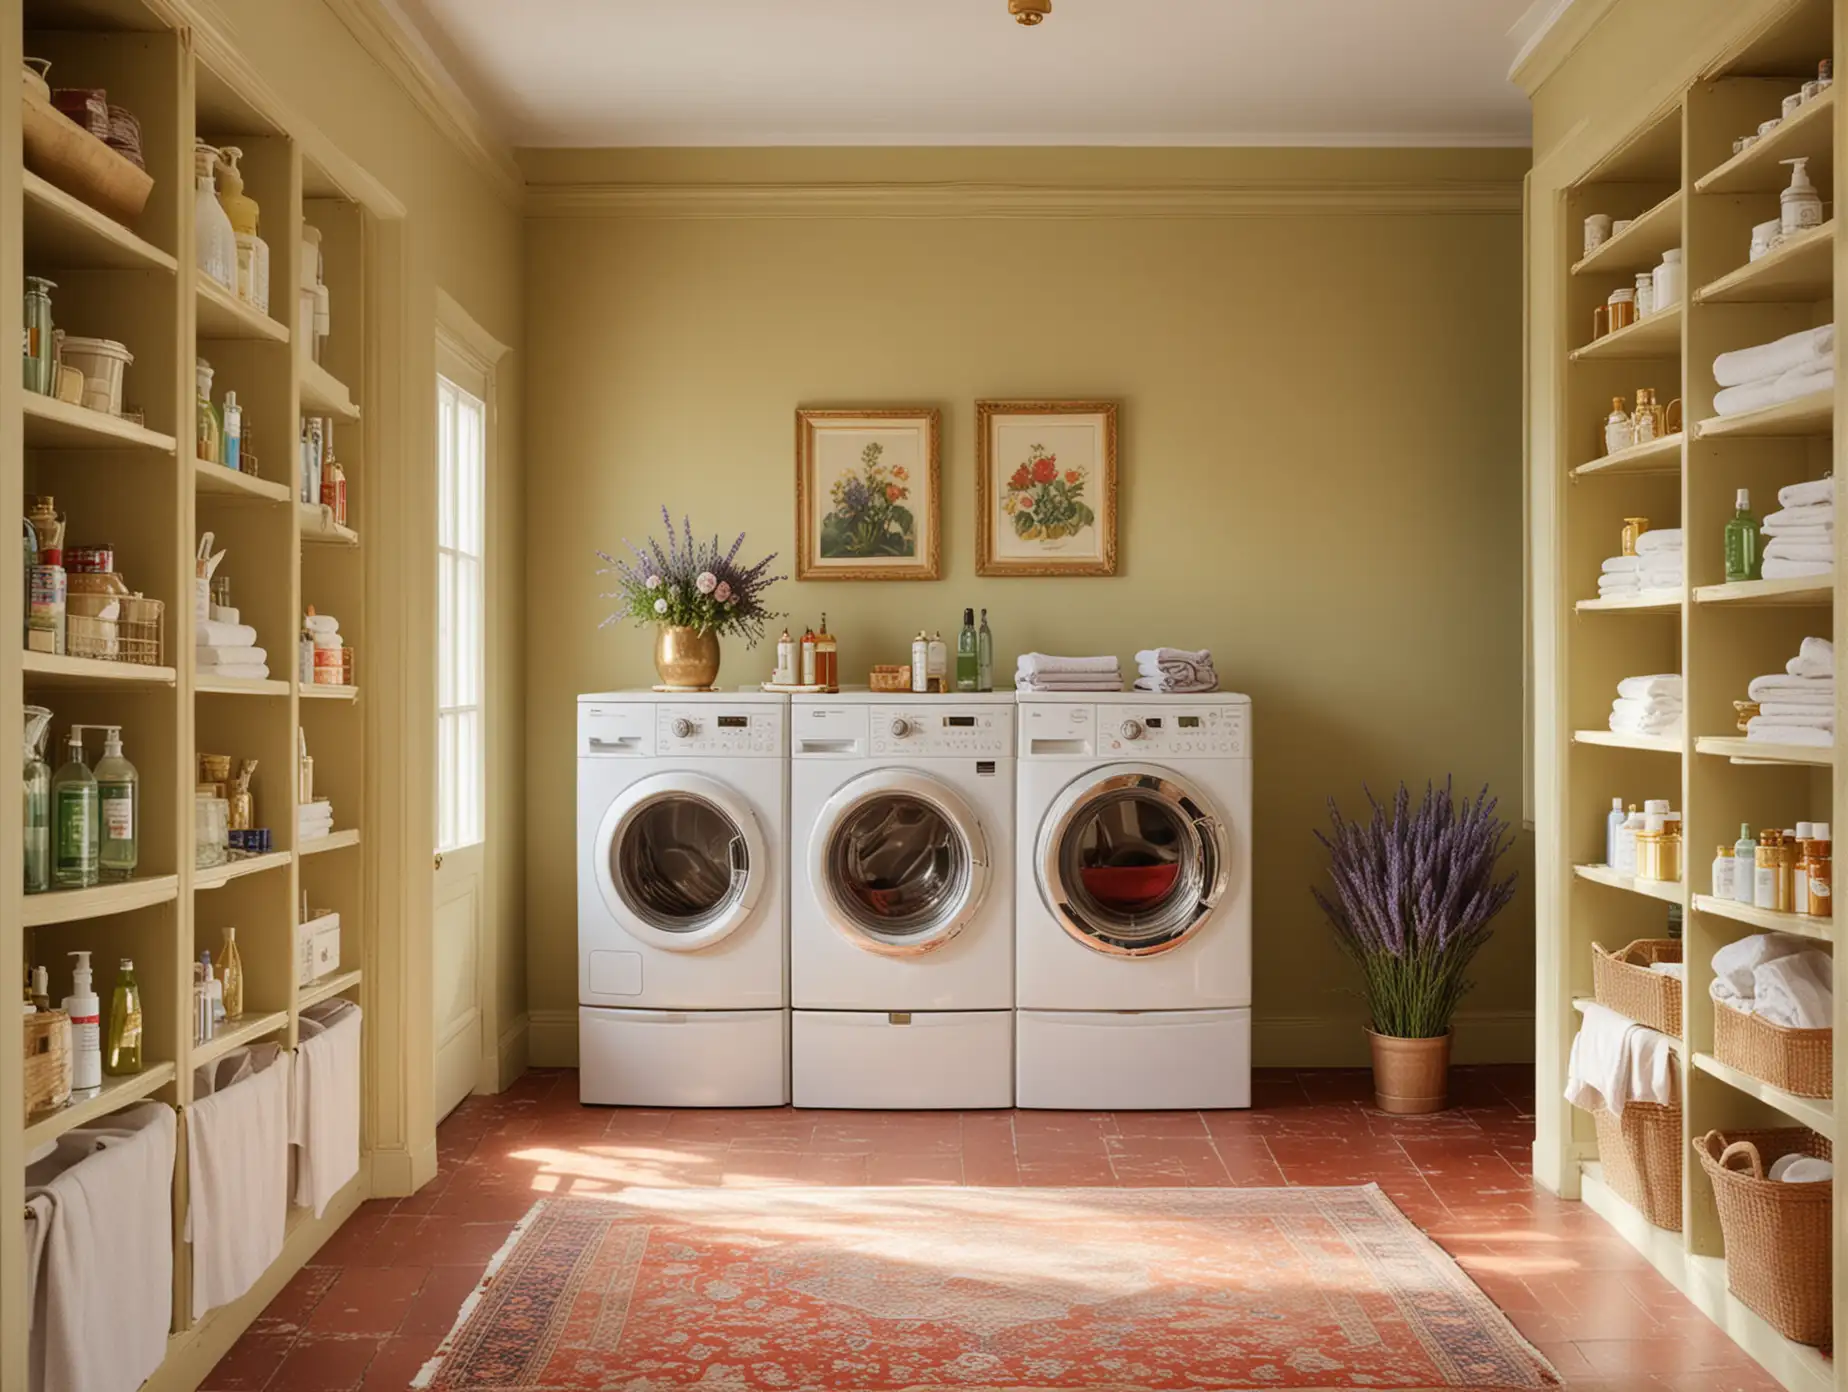 laundry room with with washr and dryer Imagine a scene bathed in soft golden light, with red oxide floor and lime green walls, a plush rug underfoot, and  In the center, a lavish bouquet of lavender stands tall in an exquisite vase, framed by shelves displaying gleaming gold containers of high-end detergents and fabric softeners.